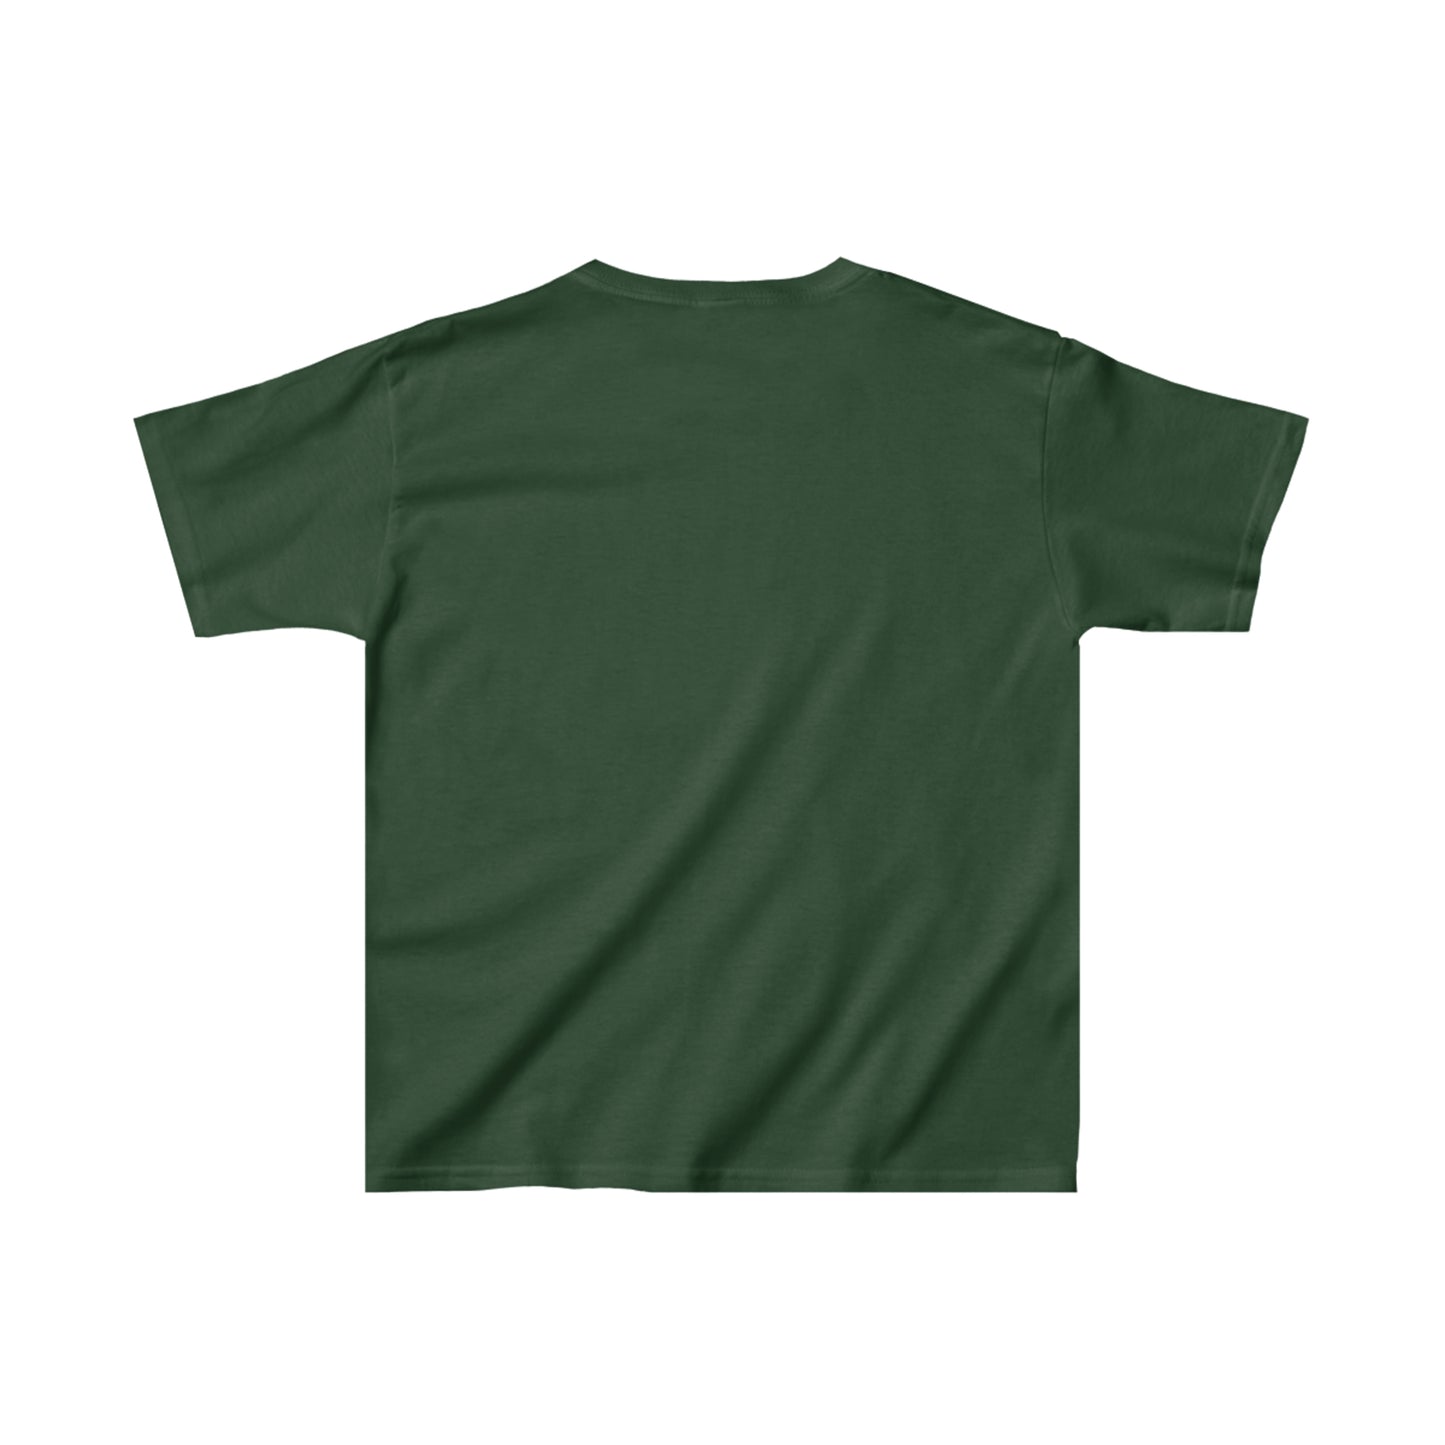 Ain't New to This - YOUTH T-Shirt